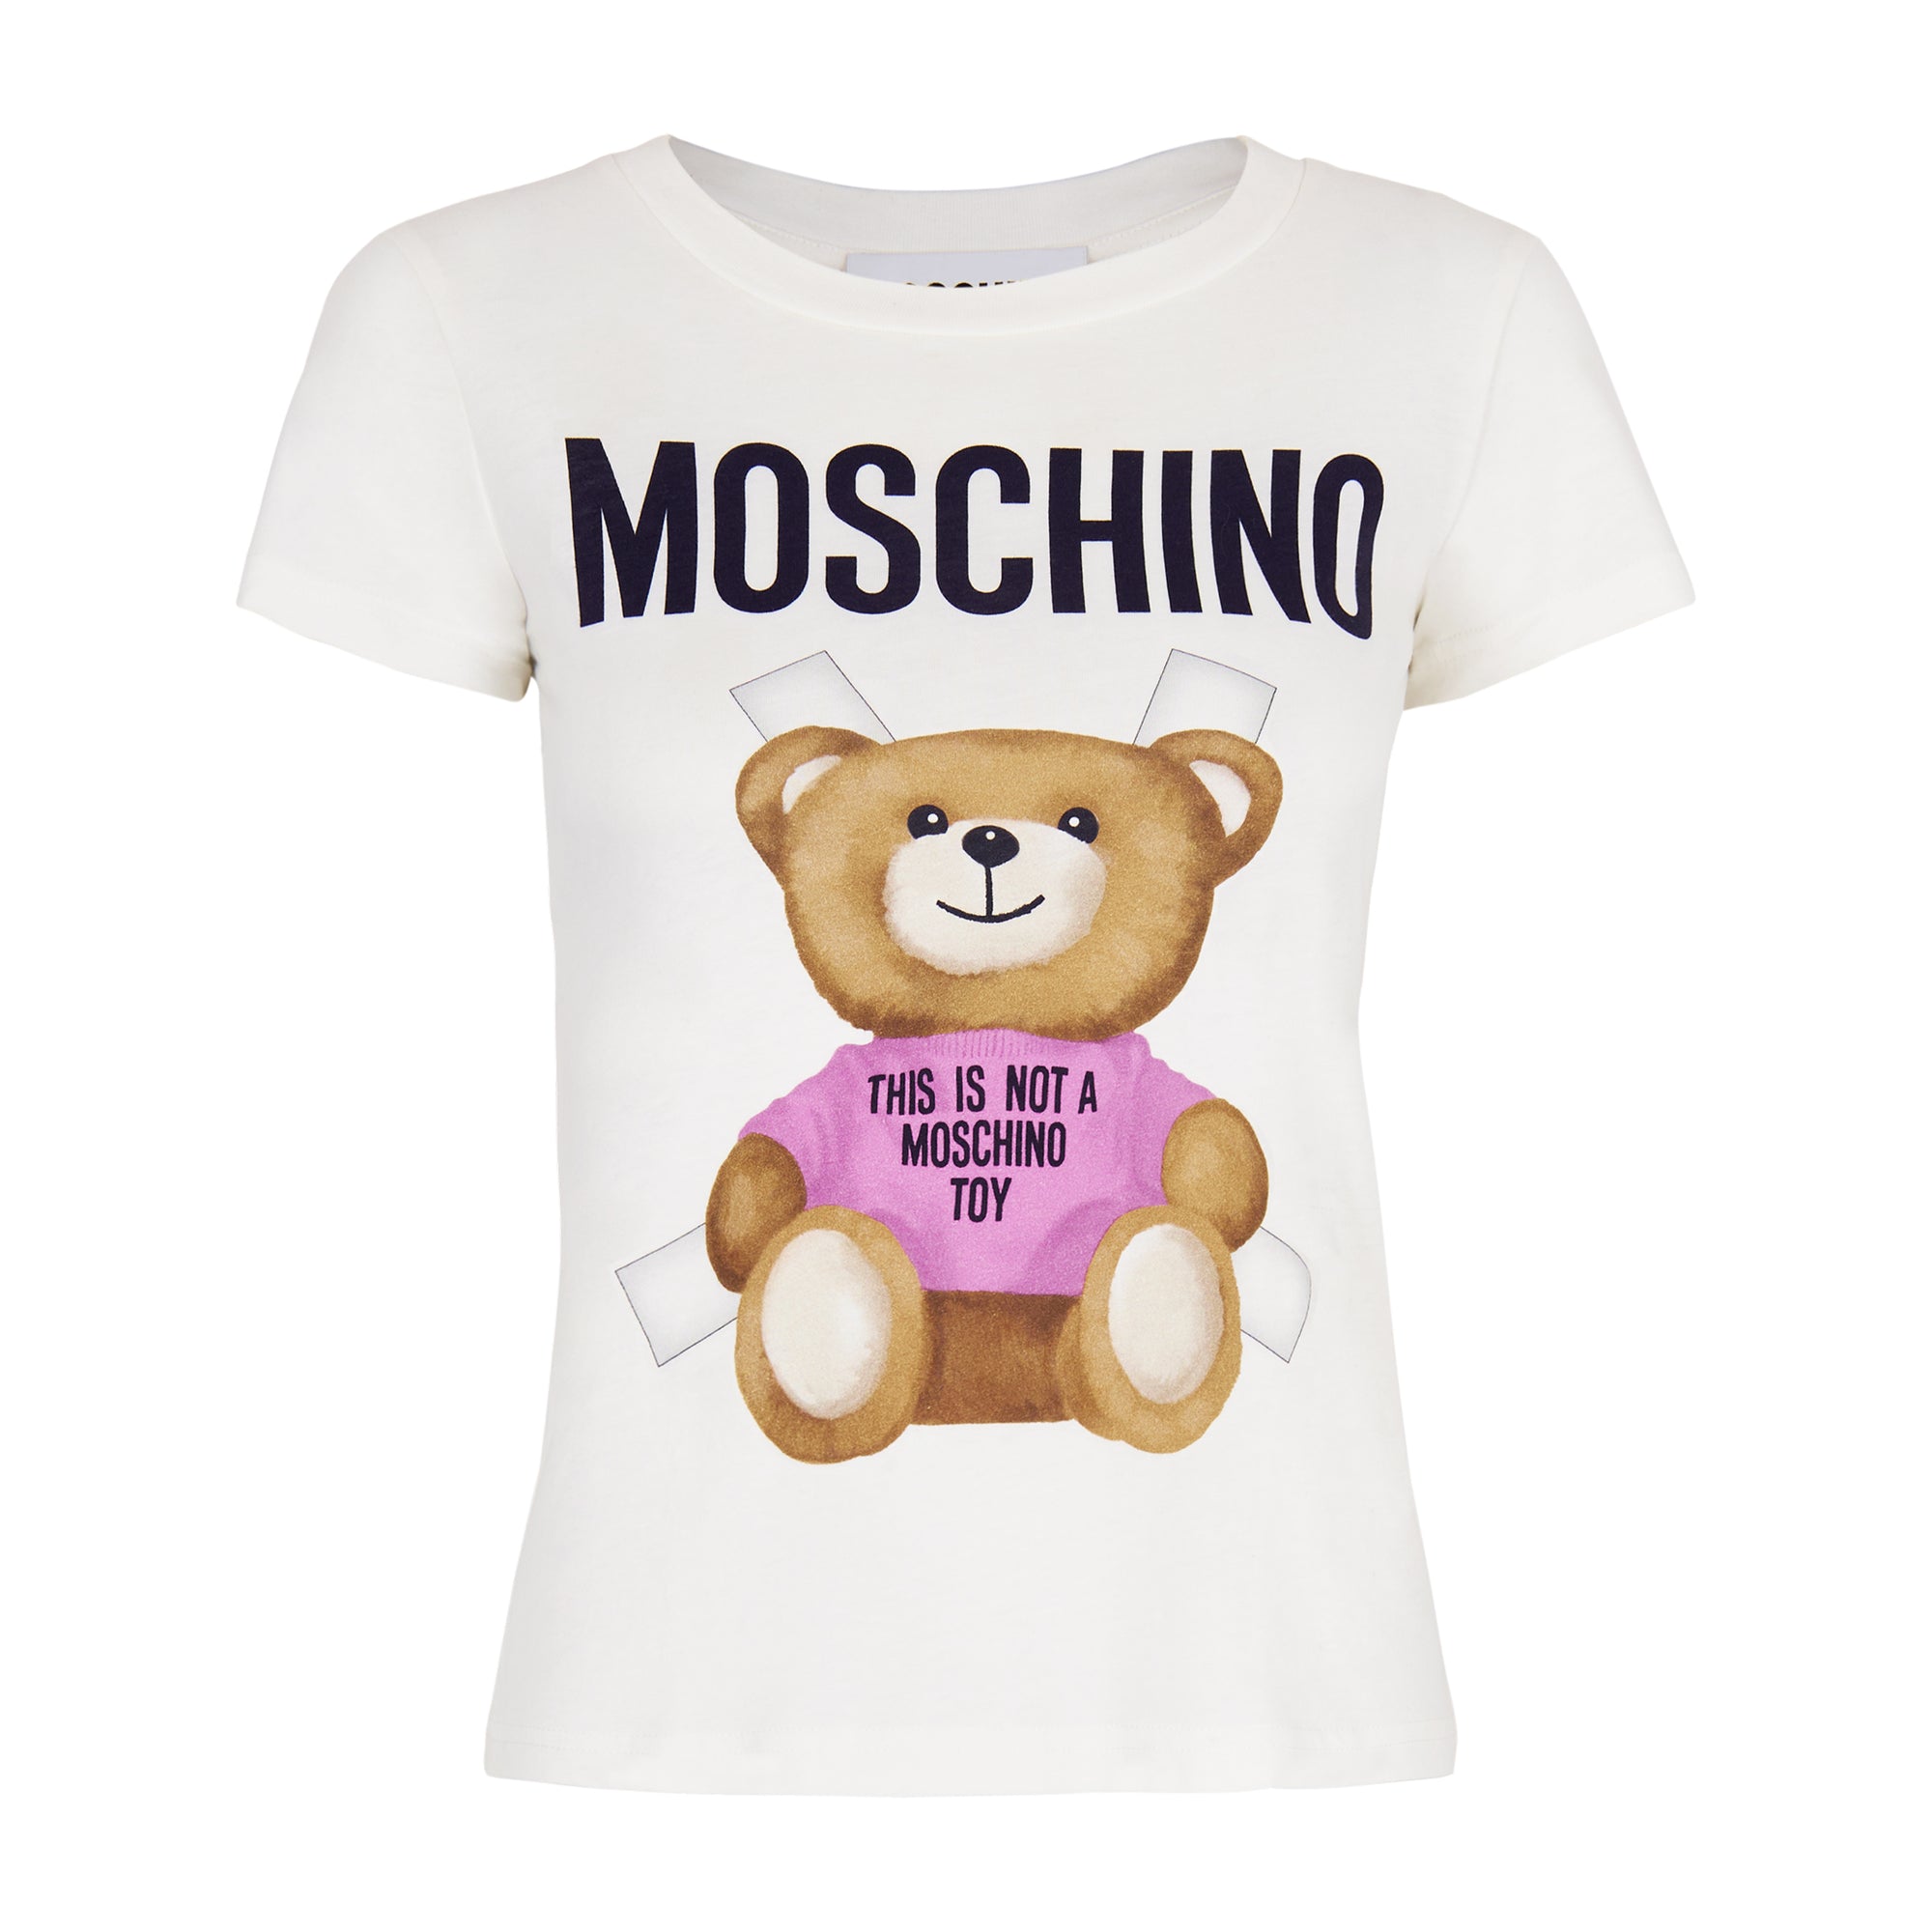 Moschino "This is not a Moschino toy" T-shirt